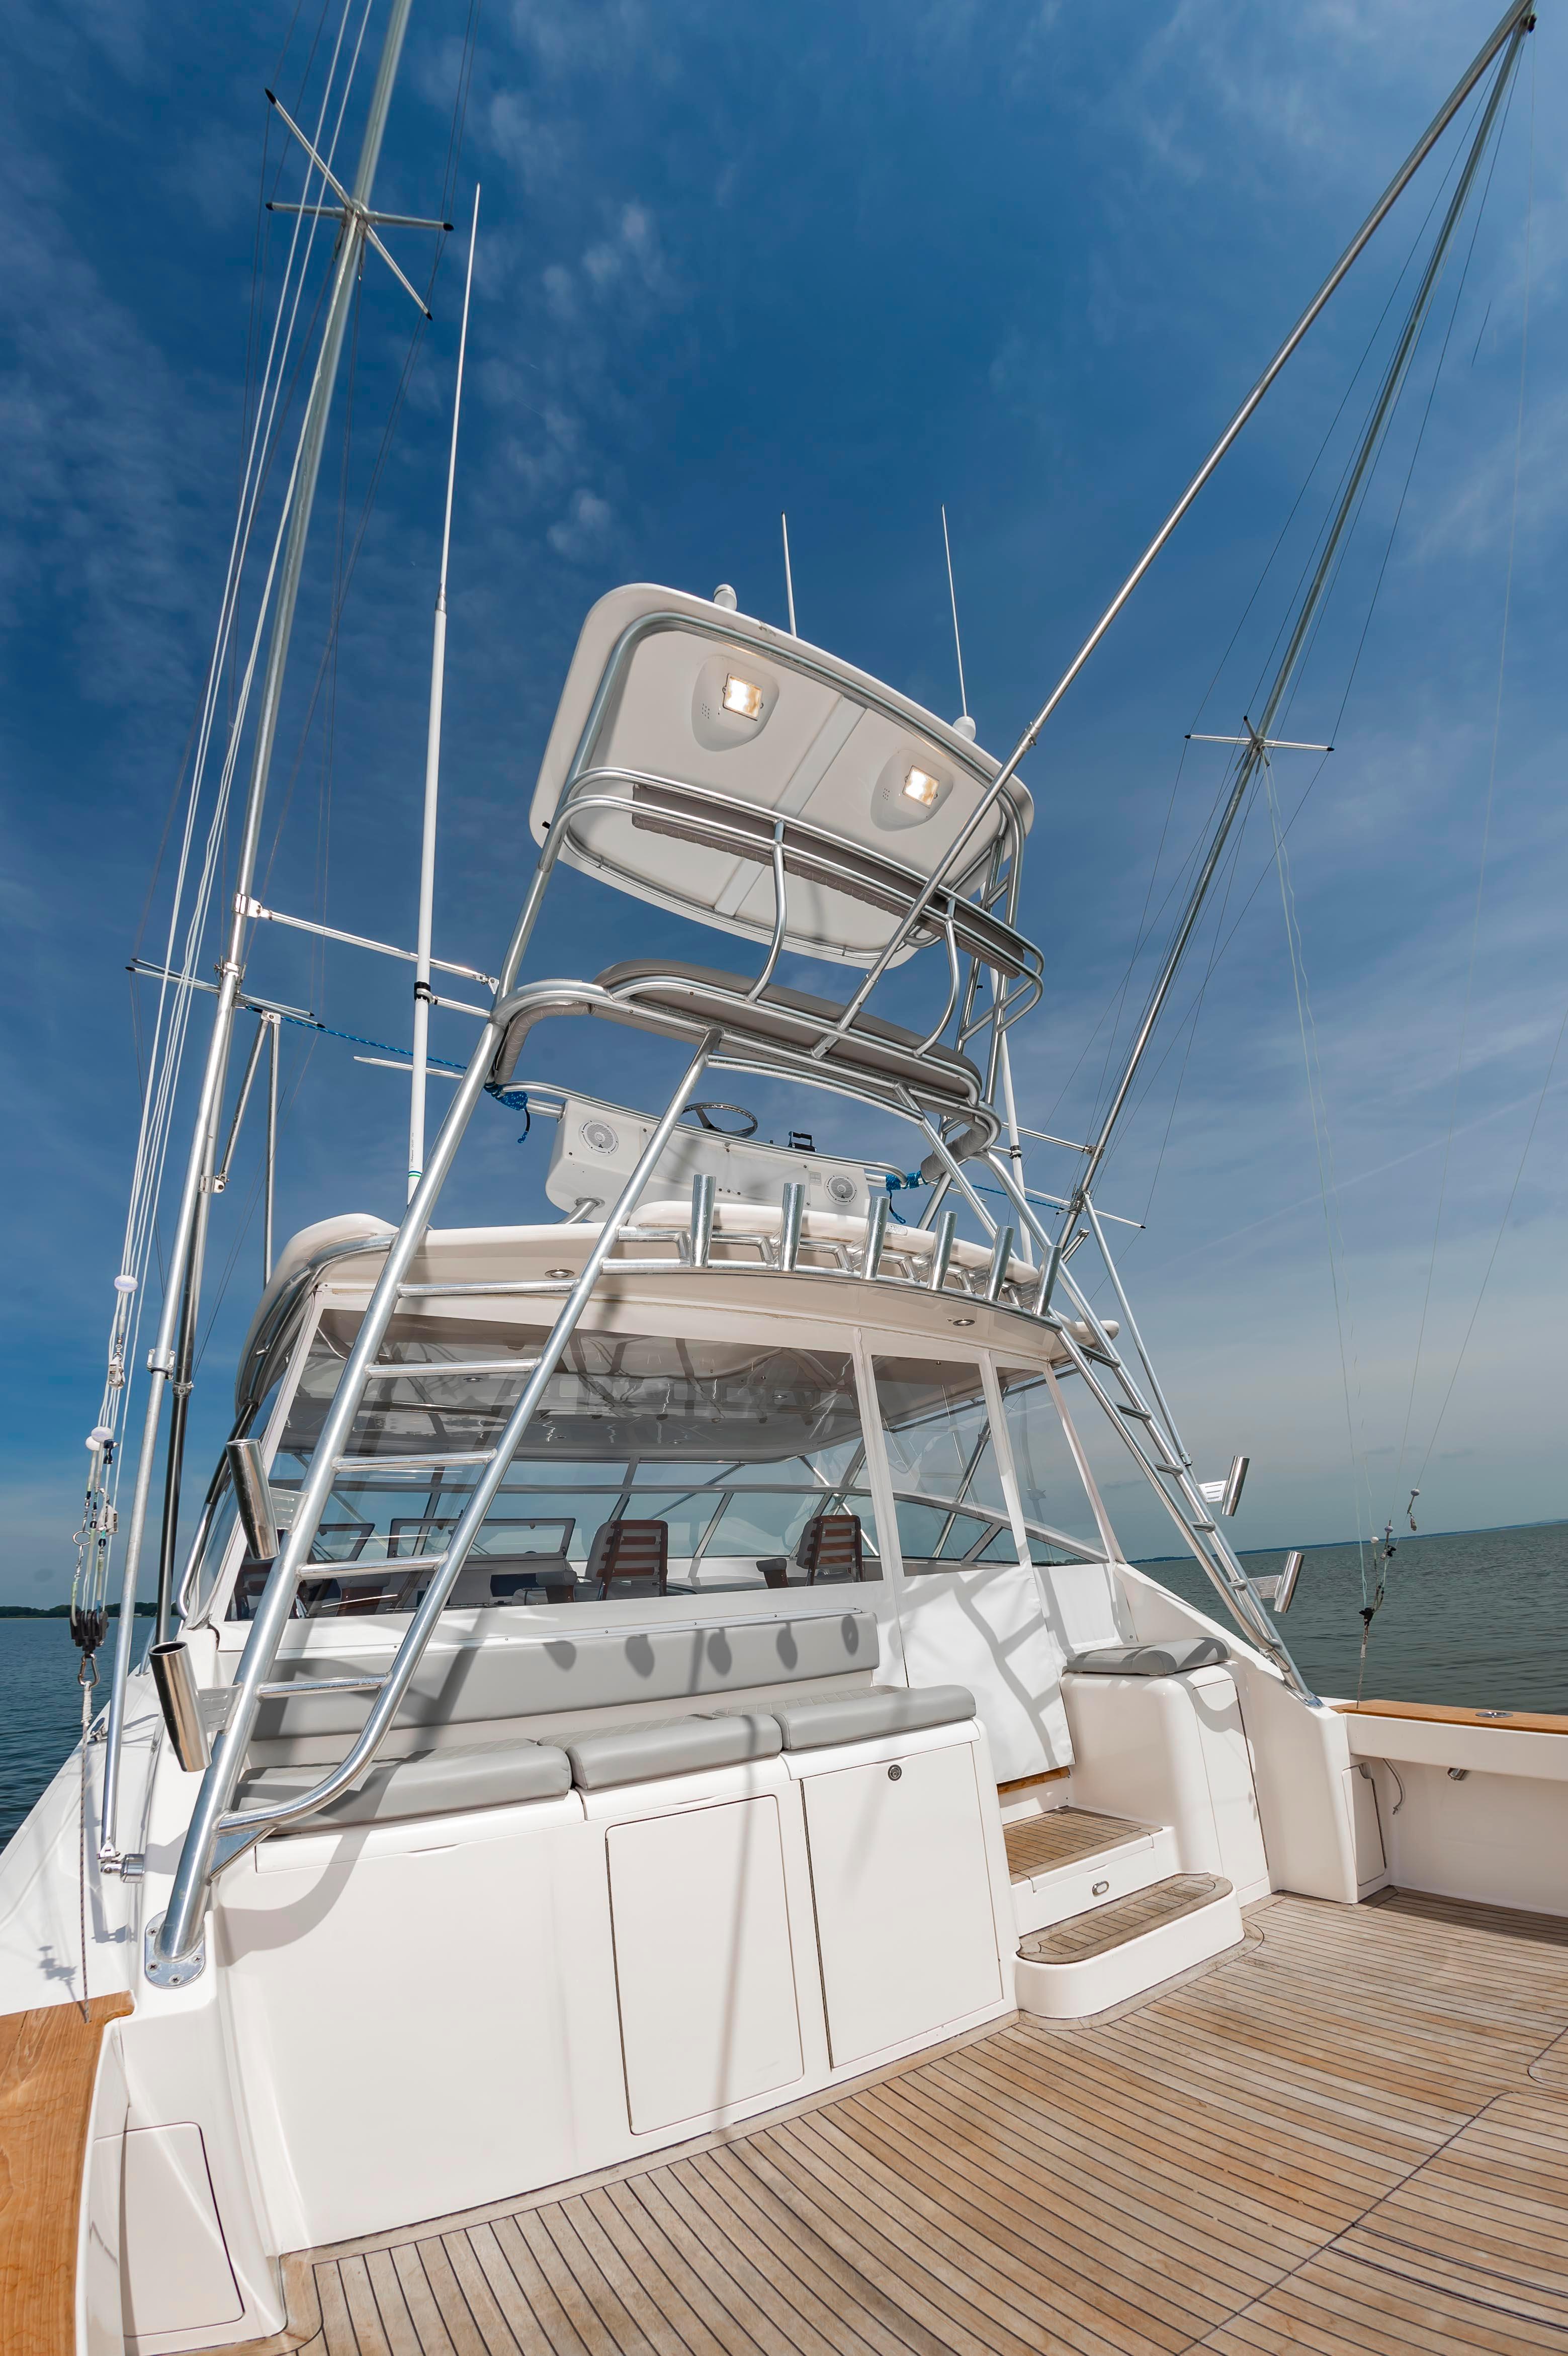 2006 Viking 45 Express "Cool Blue", tower view 2